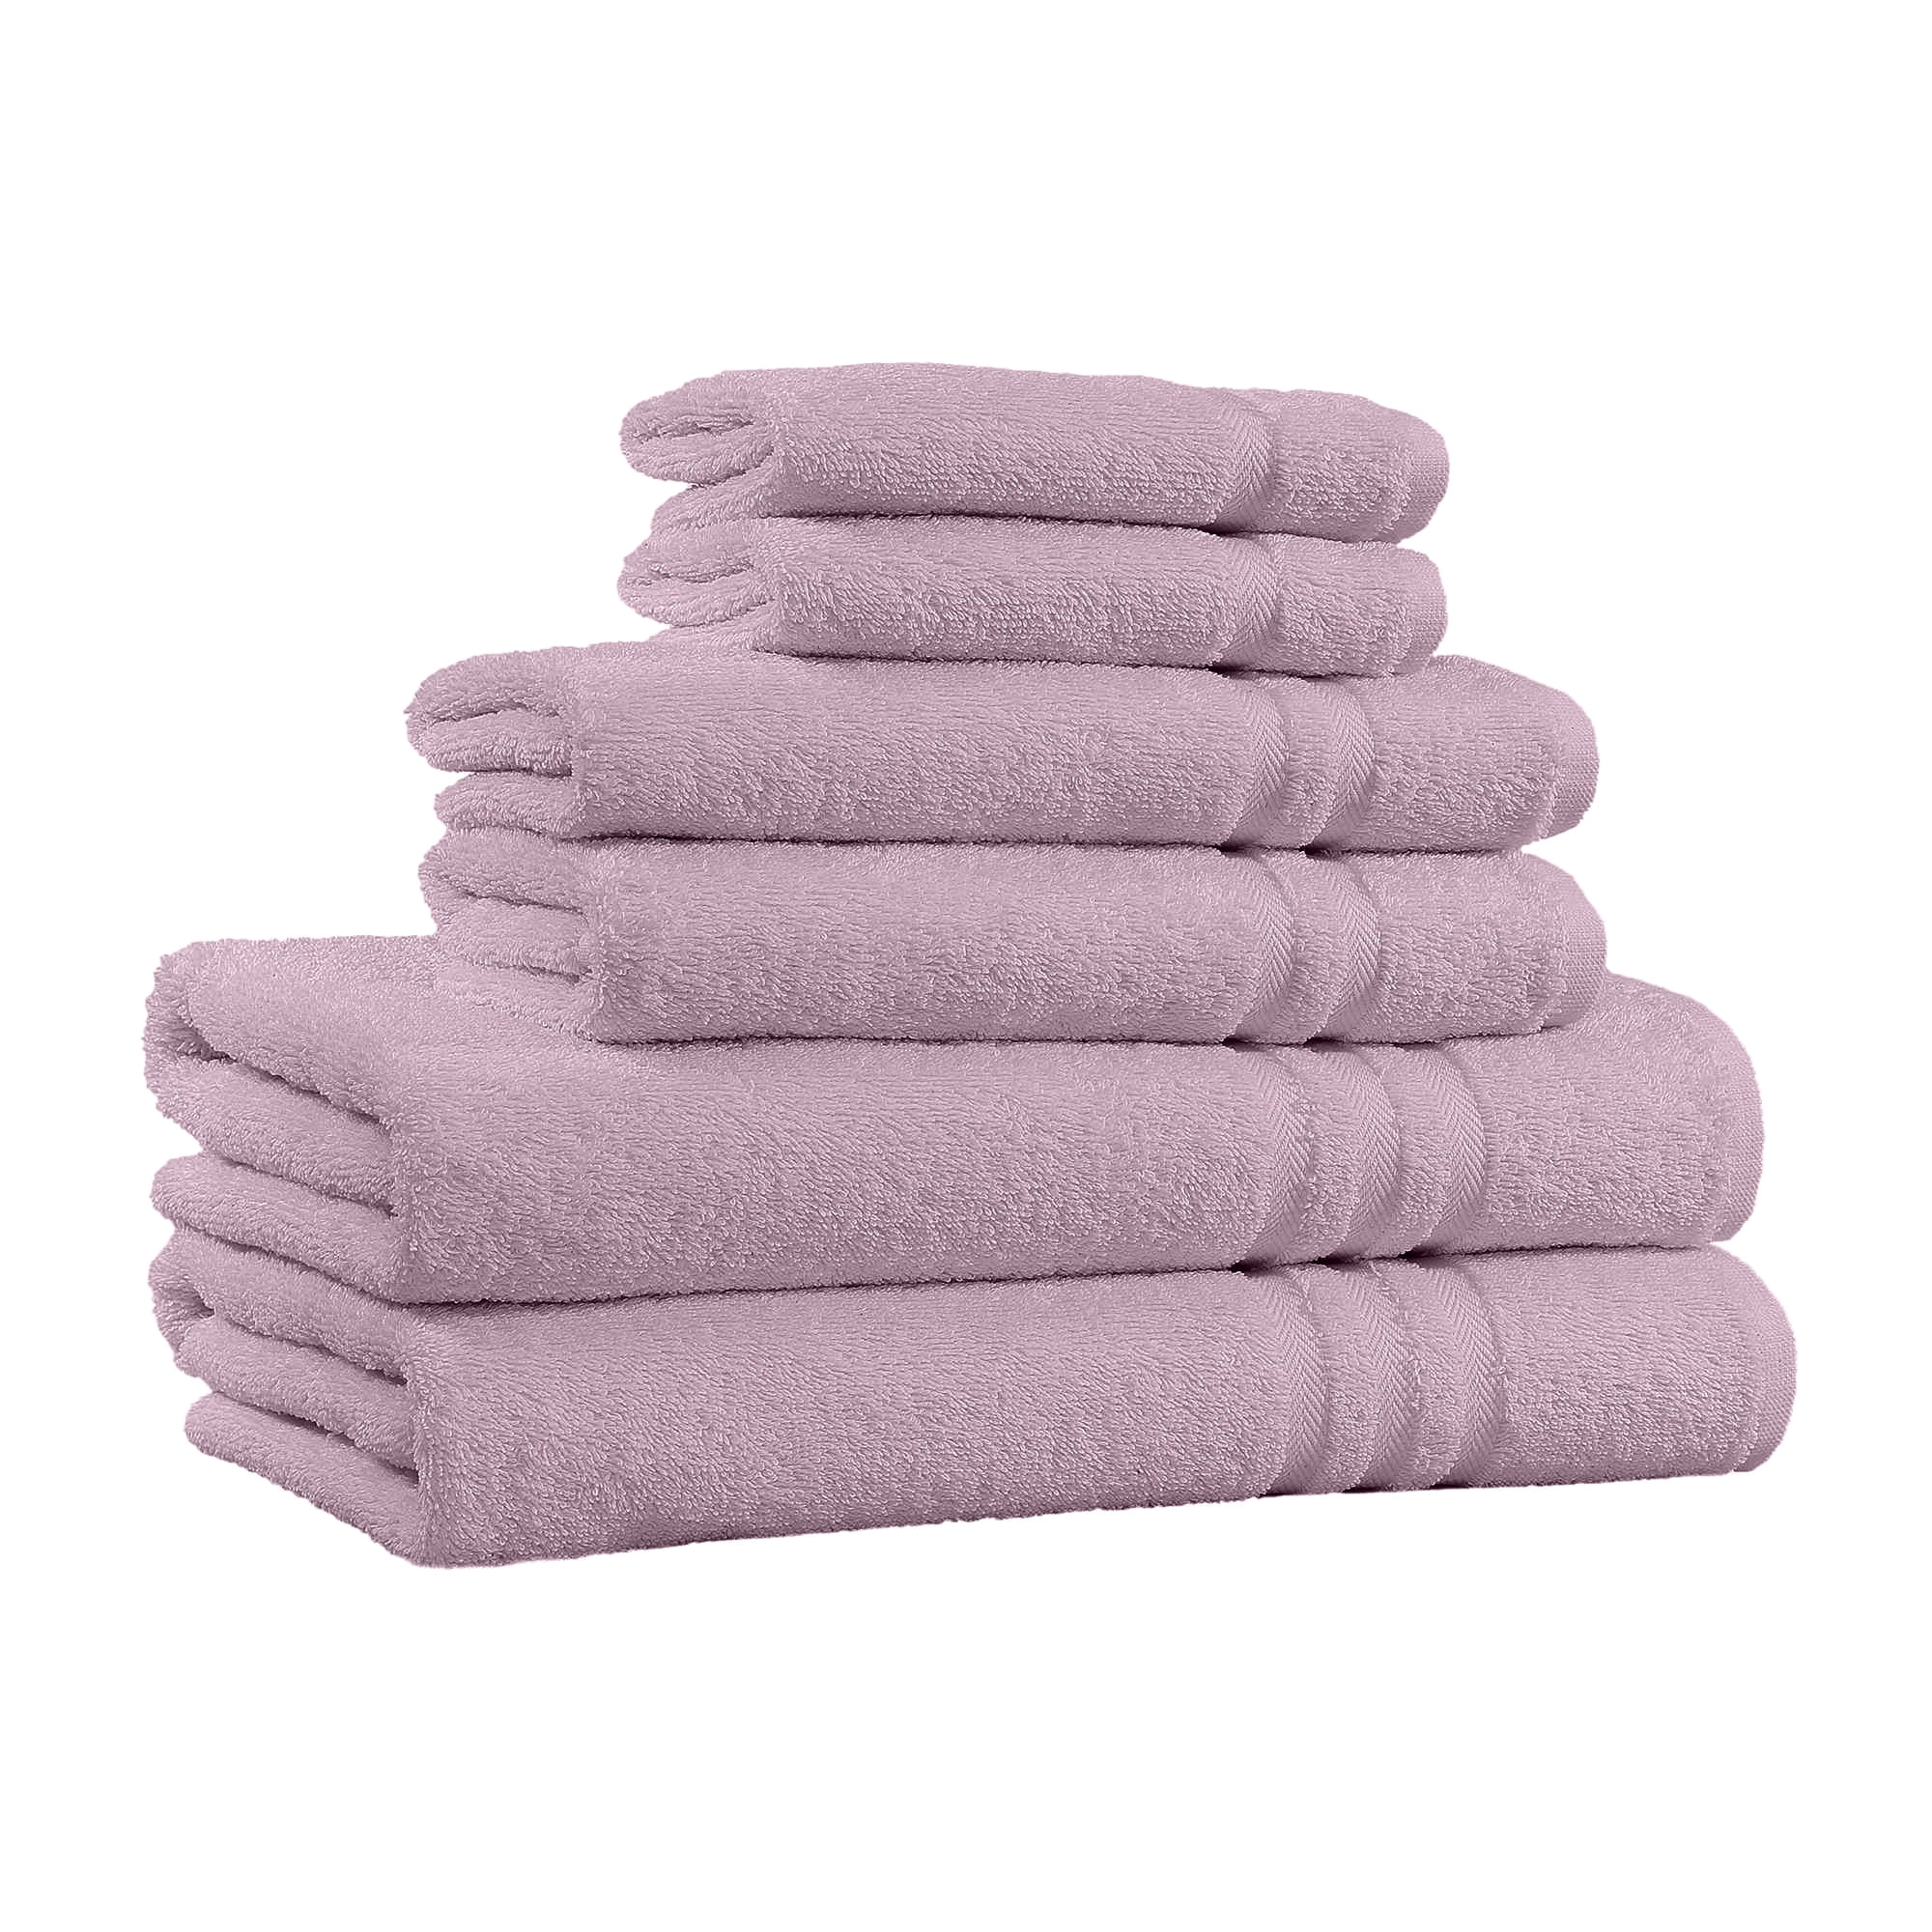 Details about   *Pack Of 4* driSoft 100% Cotton Hand Towels 13 x 13 In In CORAL 